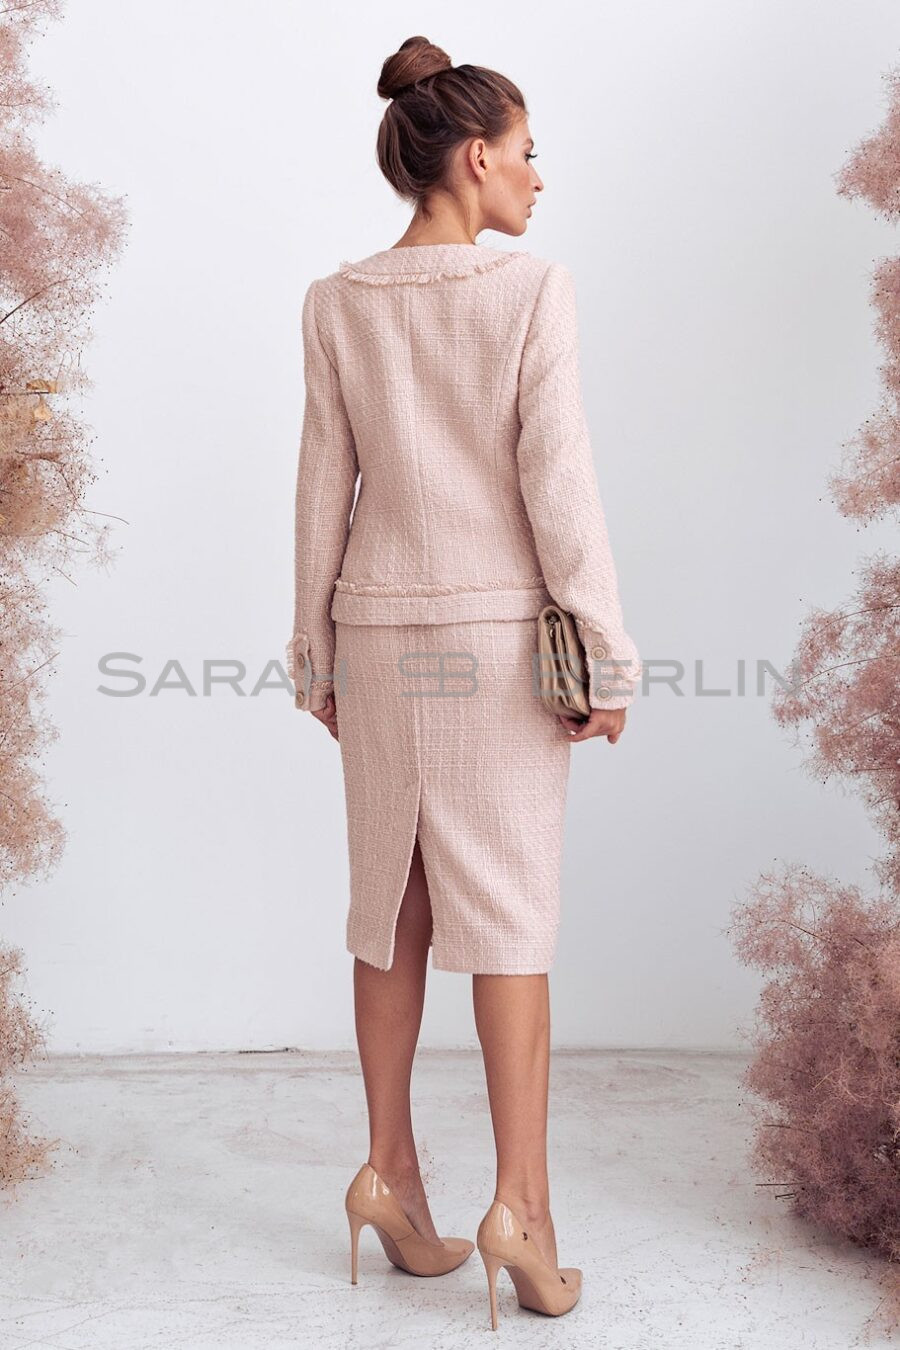 Tweed suit with fringed skirt